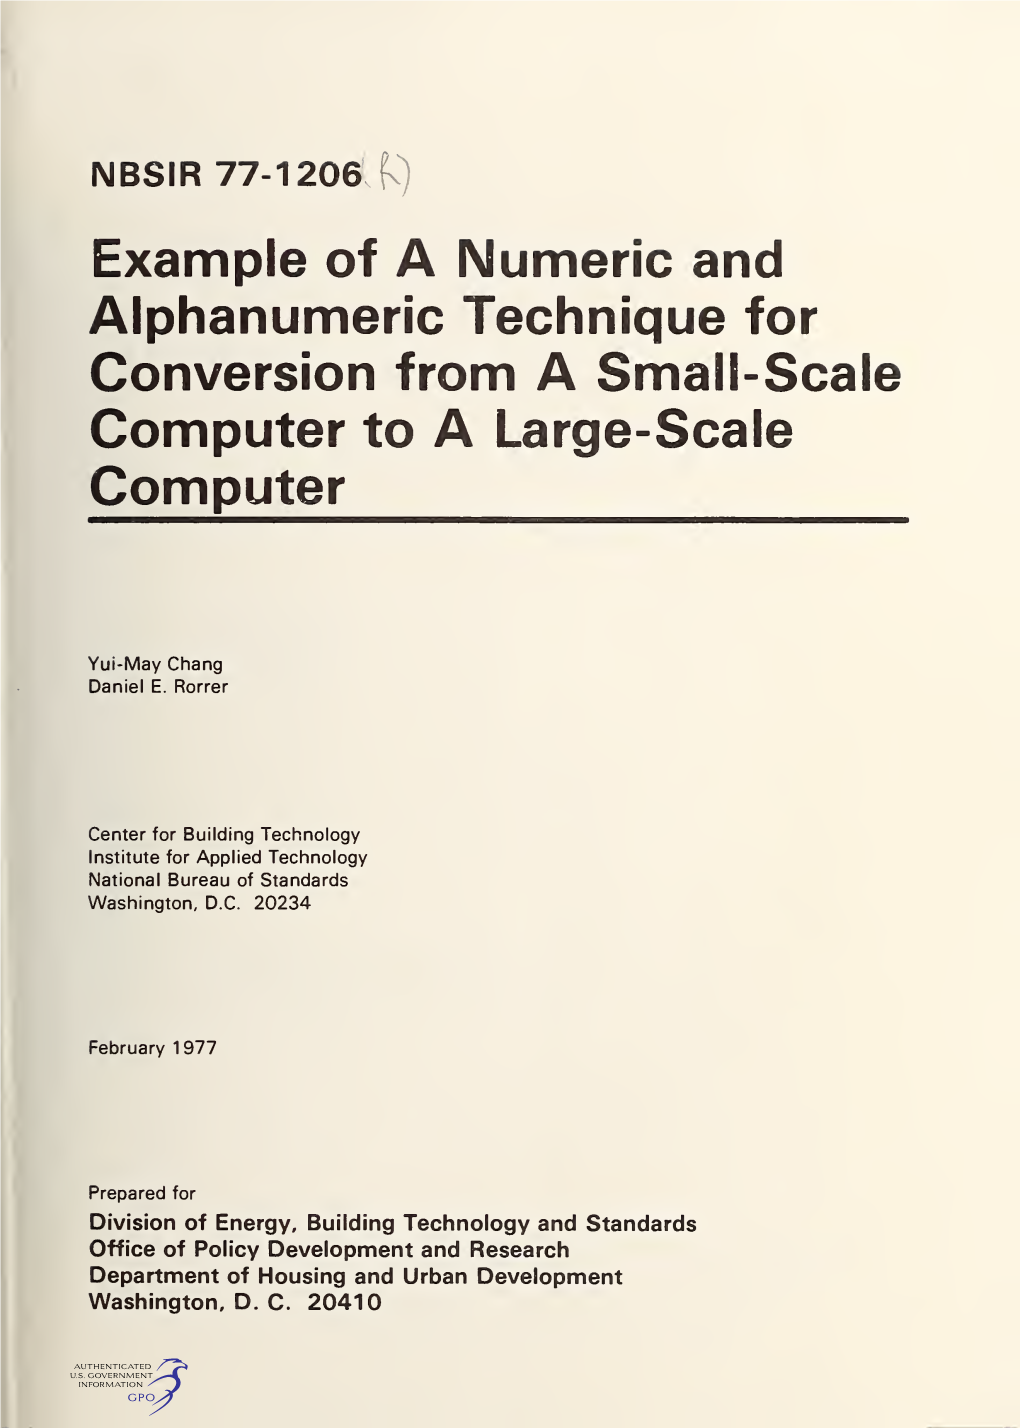 Example of a Numeric and Alphanumeric Technique for Conversion from a Small-Scale Computer to a Large-Scale Computer